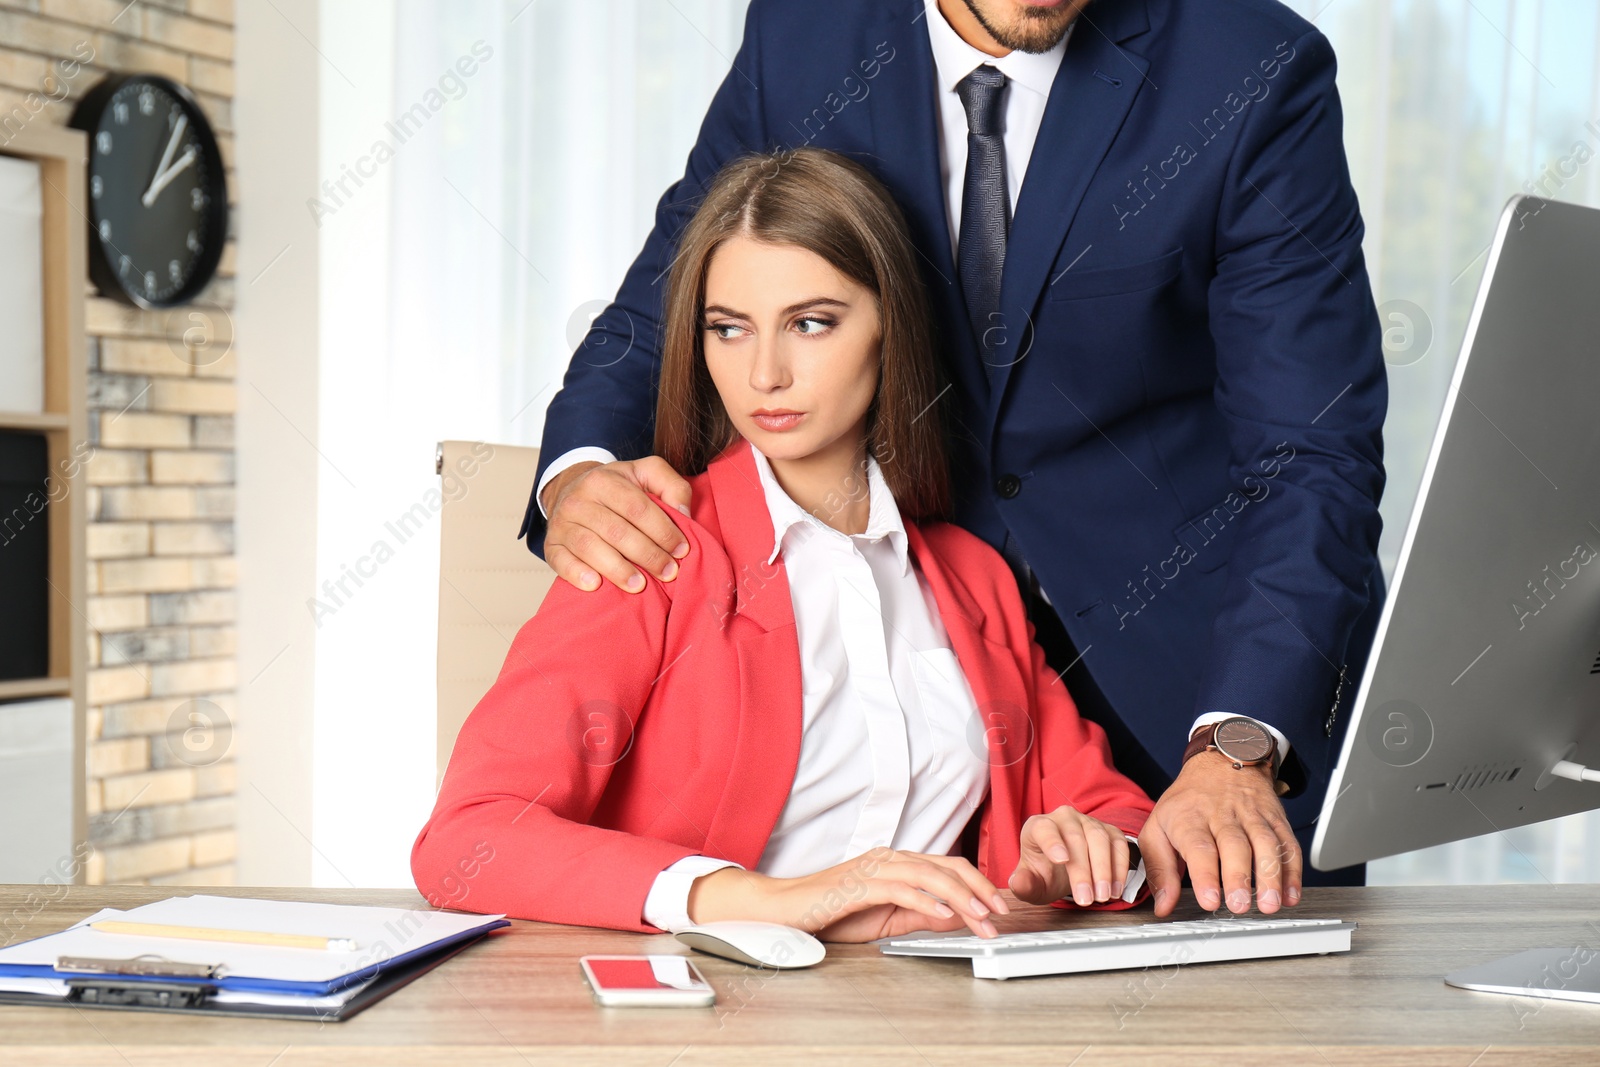 Photo of Boss molesting his female secretary in office. Sexual harassment at work